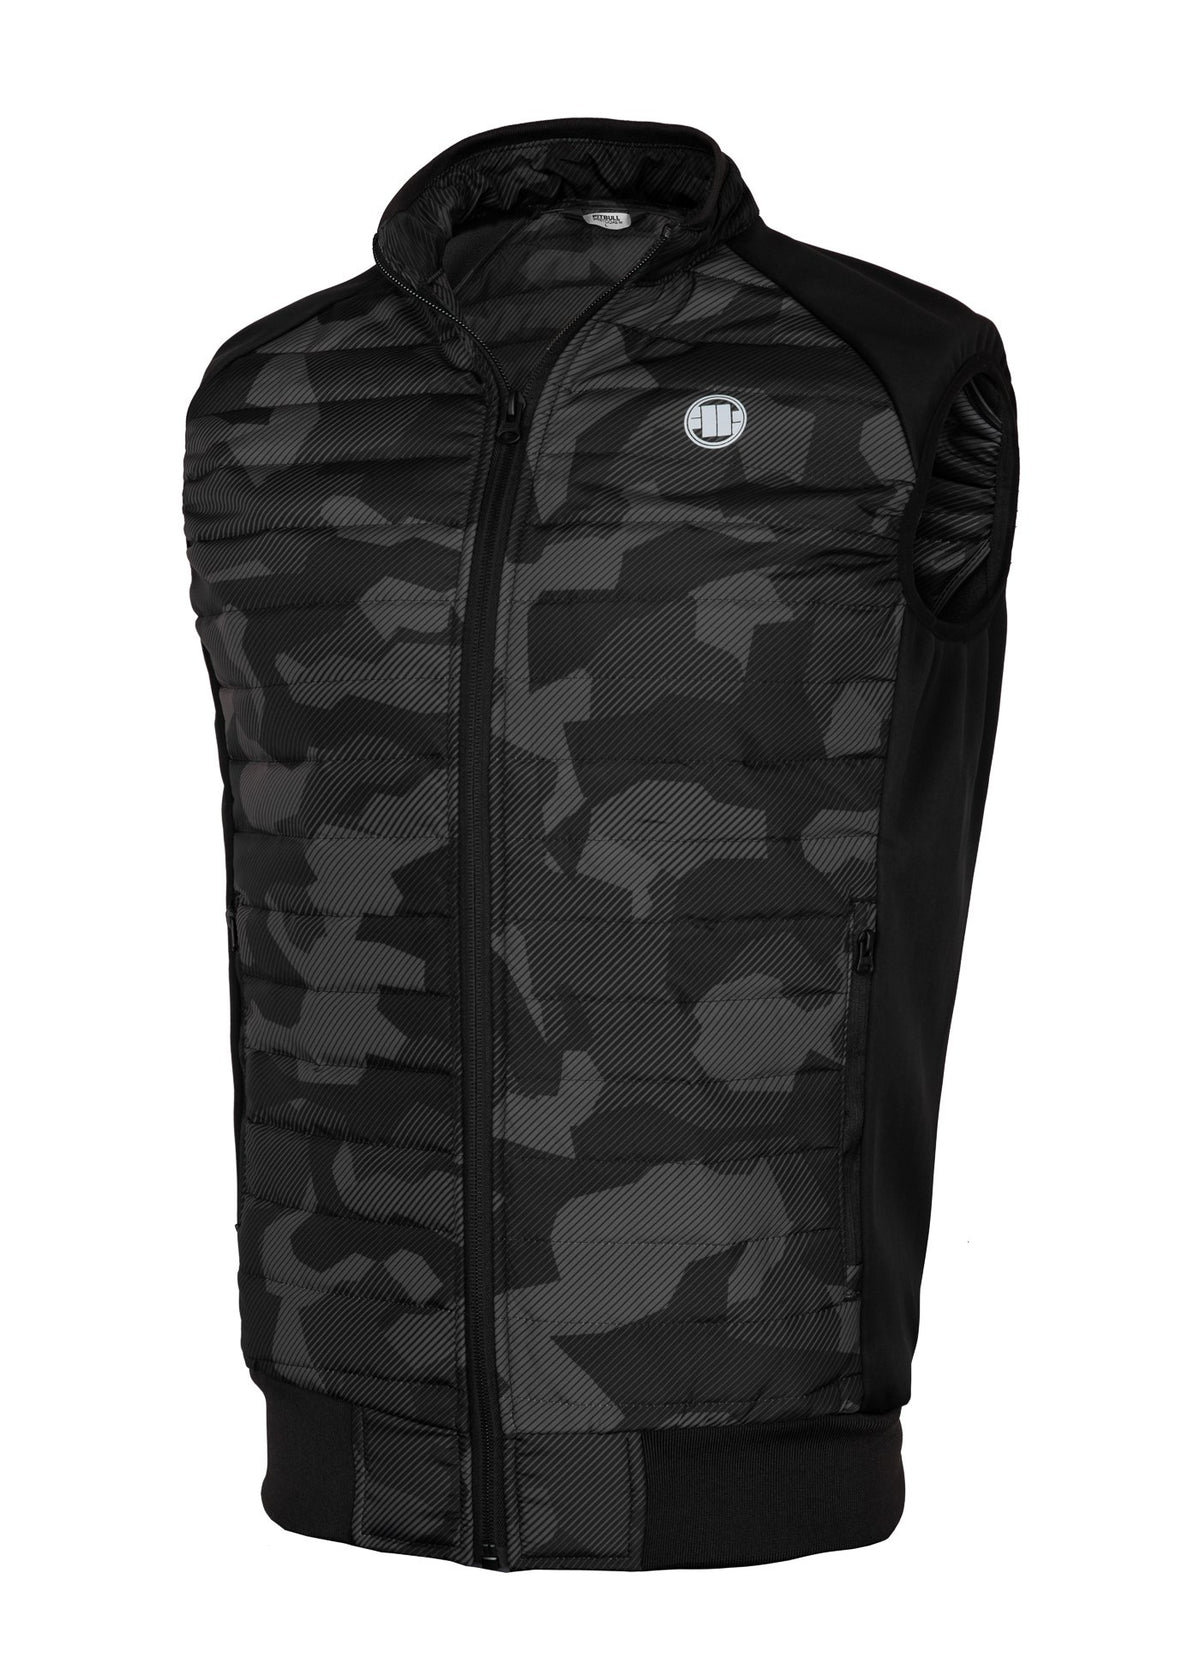 PACIFIC Black Camo Quilted Vest.